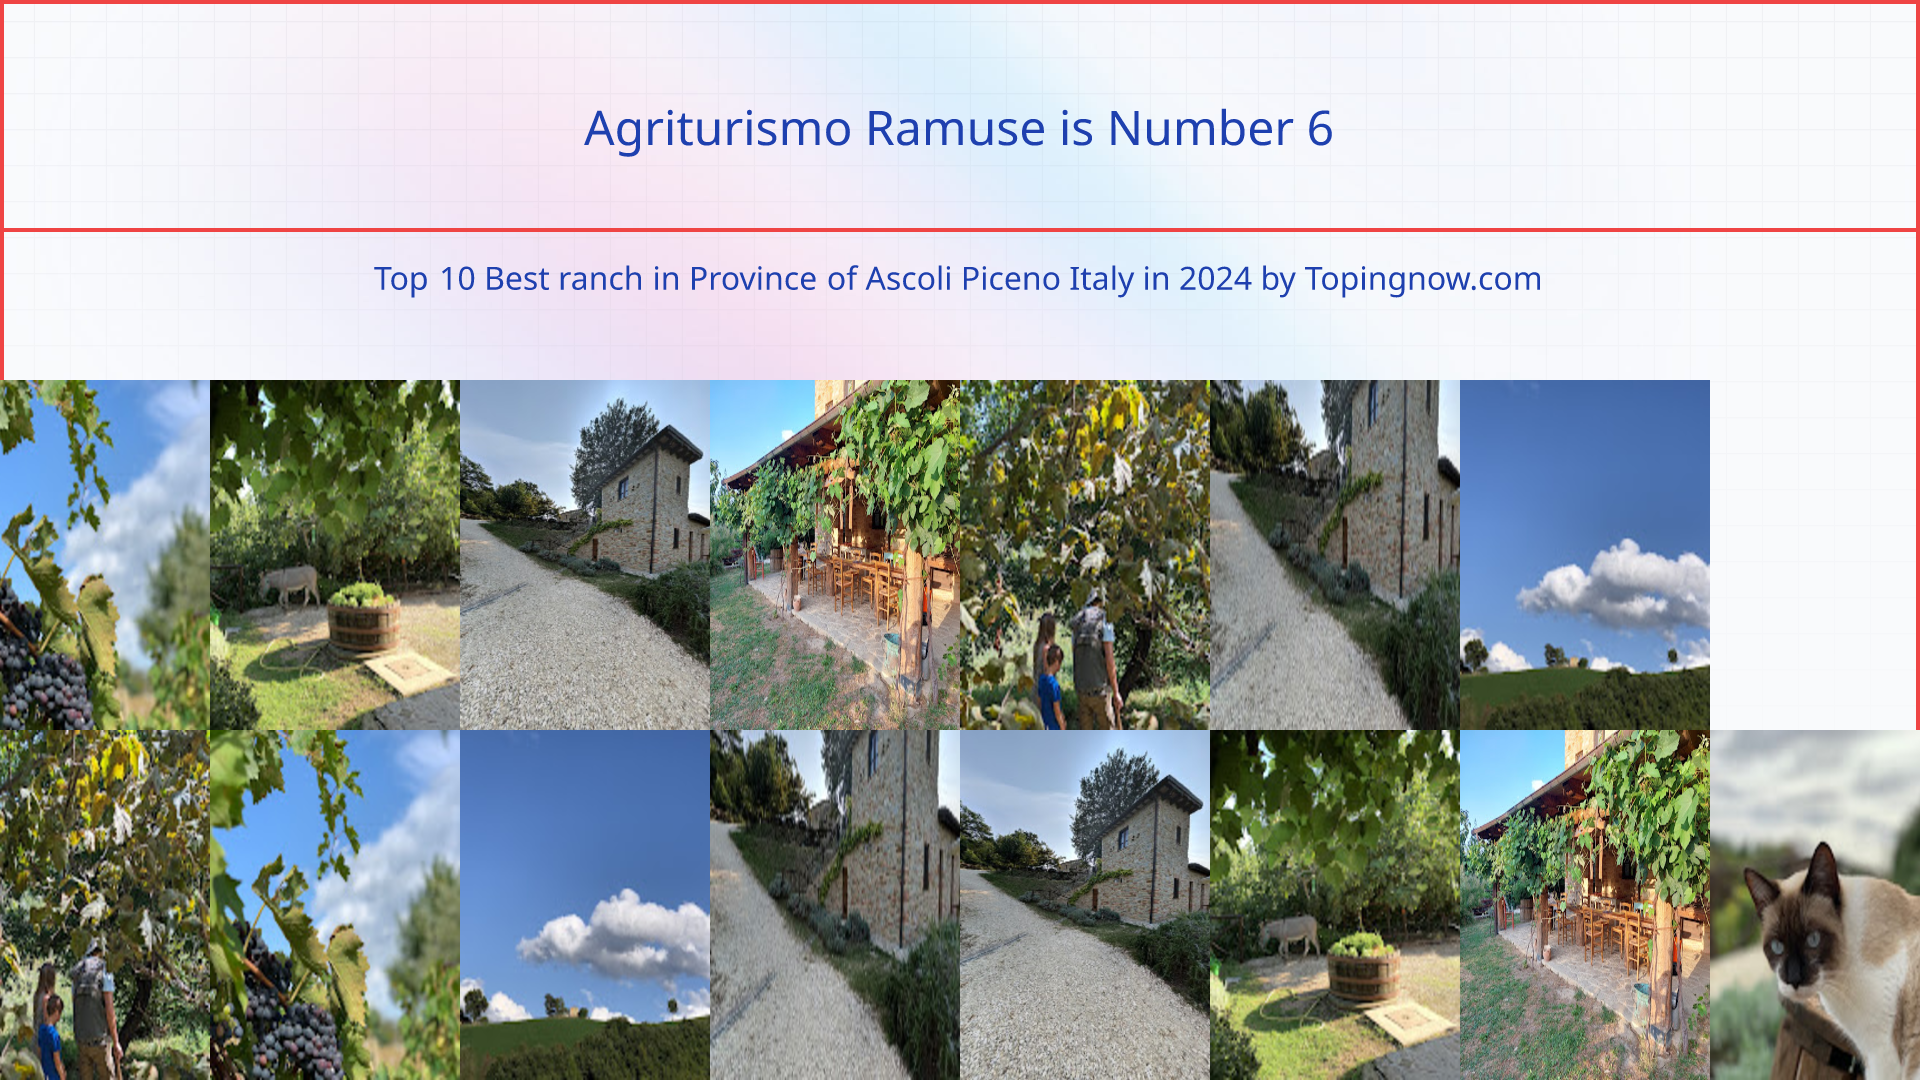 Agriturismo Ramuse: Top 10 Best ranch in Province of Ascoli Piceno Italy in 2024